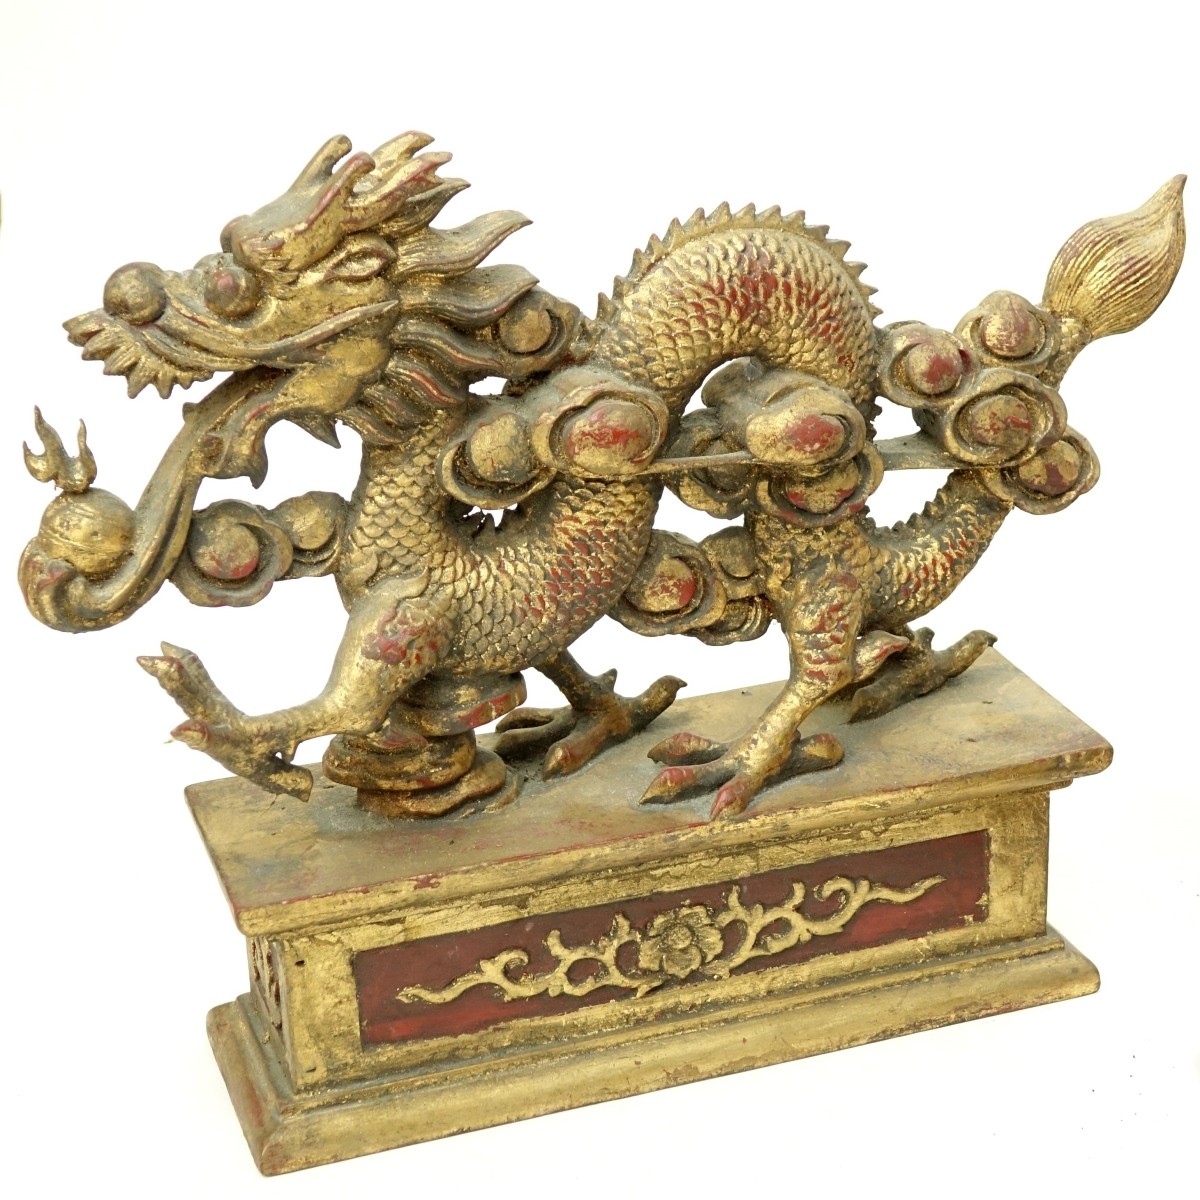 Three (3) Large Chinese Gilt Wood Dragon Carvings